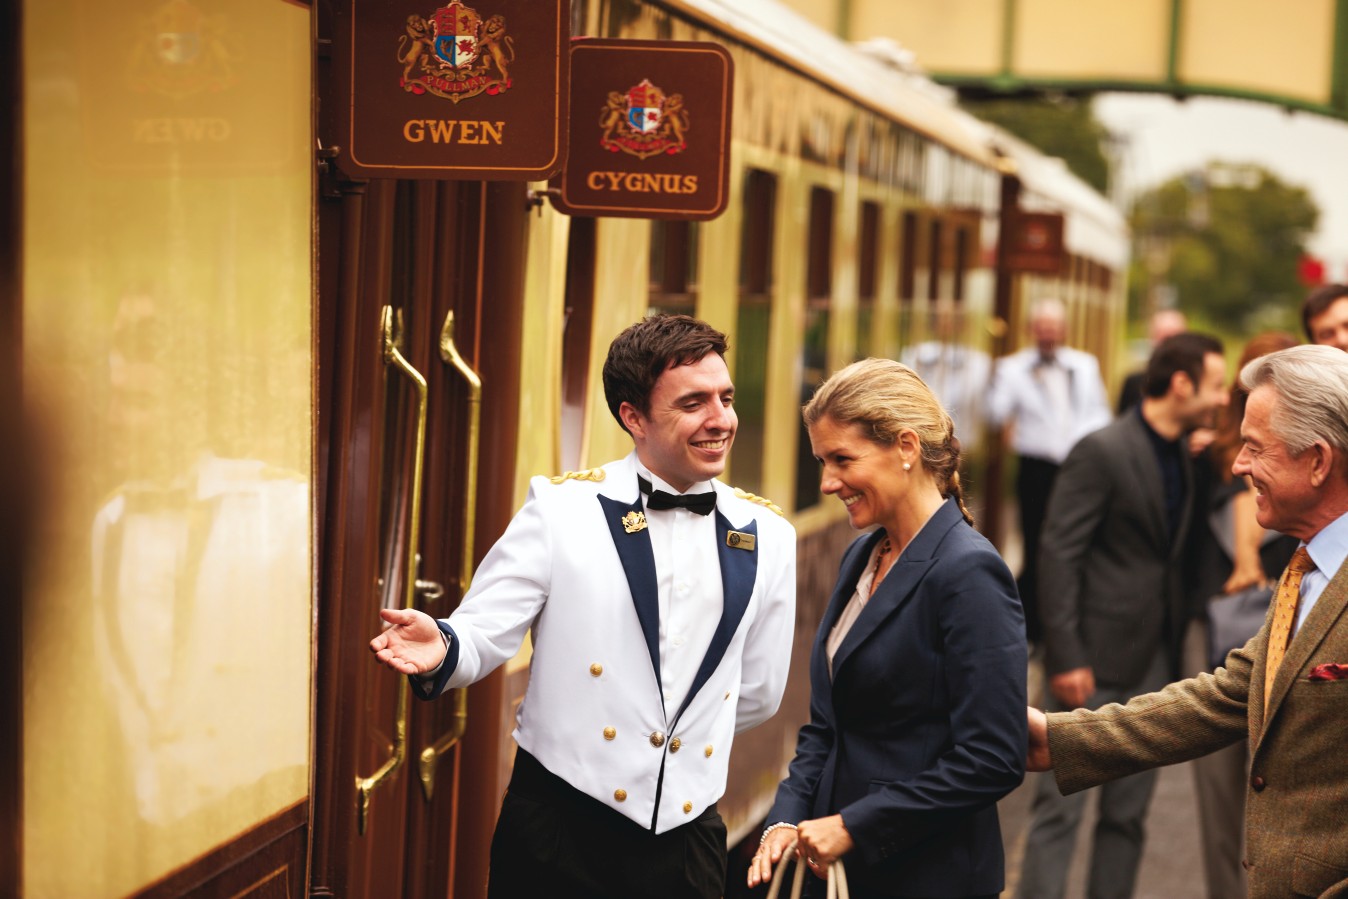 orient express train trips from cardiff